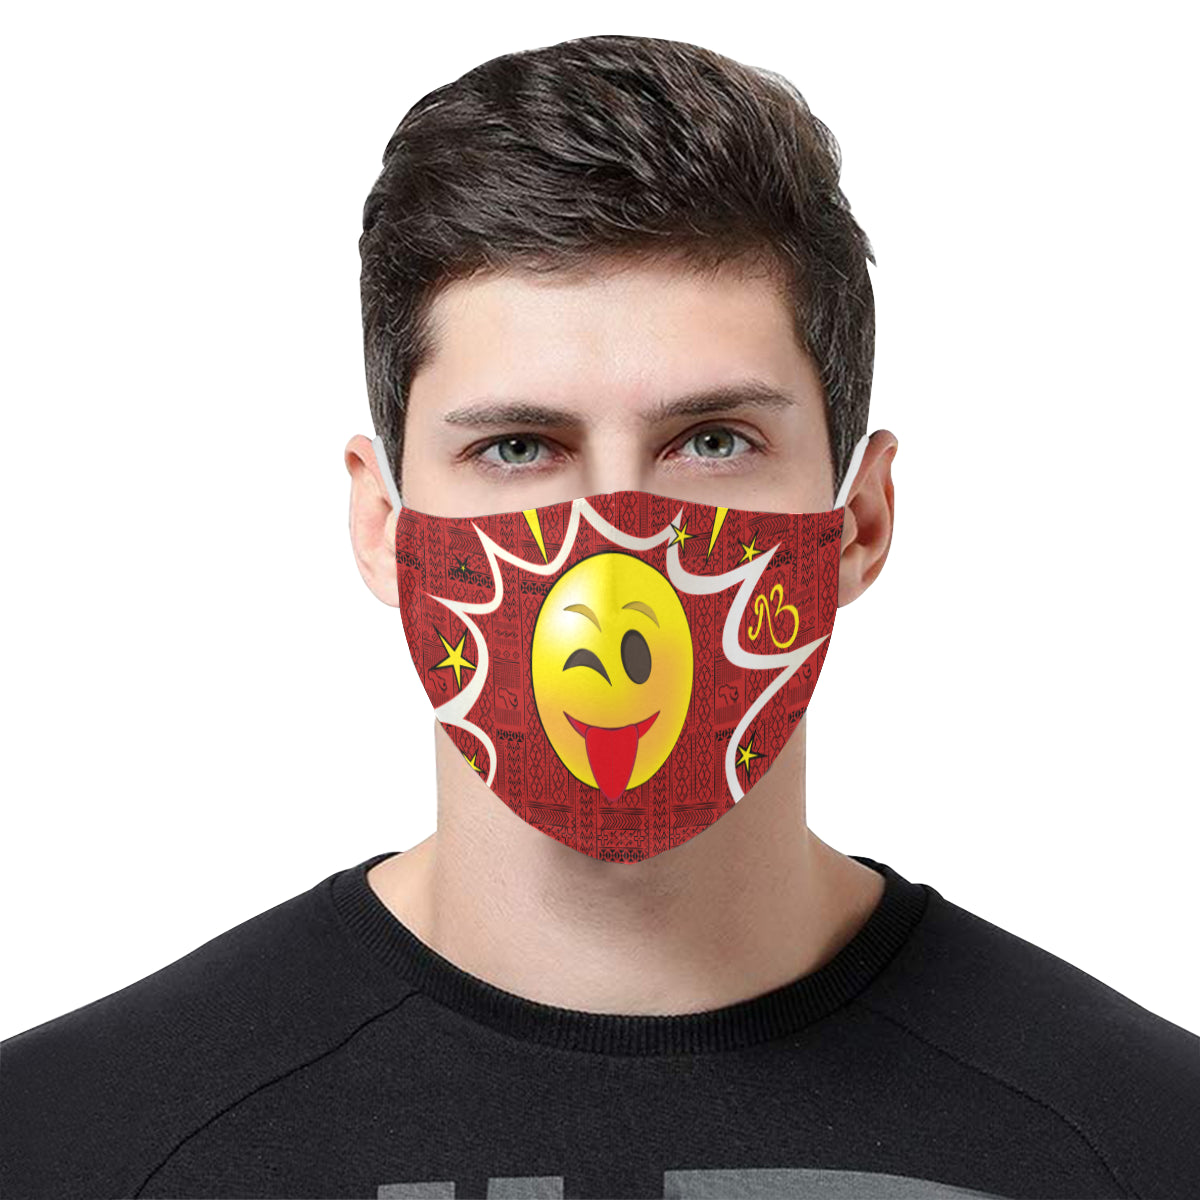 Cheeky Wink Tribal Print Comic Emoji Cotton Fabric Face Mask with Filter Slot and Adjustable Strap - Non-medical use (2 Filters Included)